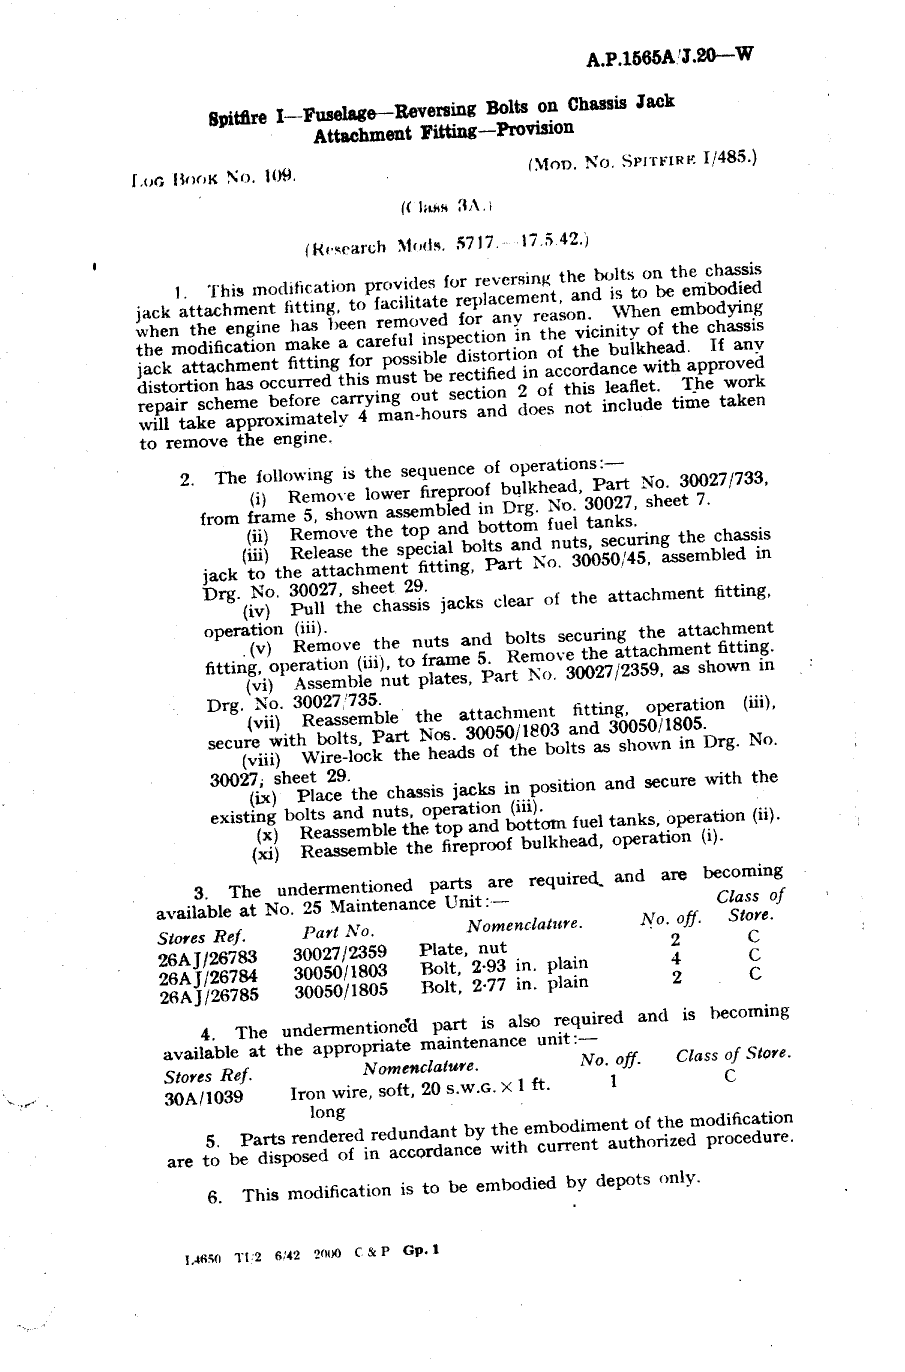 Sample page 1 from AirCorps Library document: Spitfire I Fuselage Reversing Bolts on Chassis Jack Attachment Fitting Provision